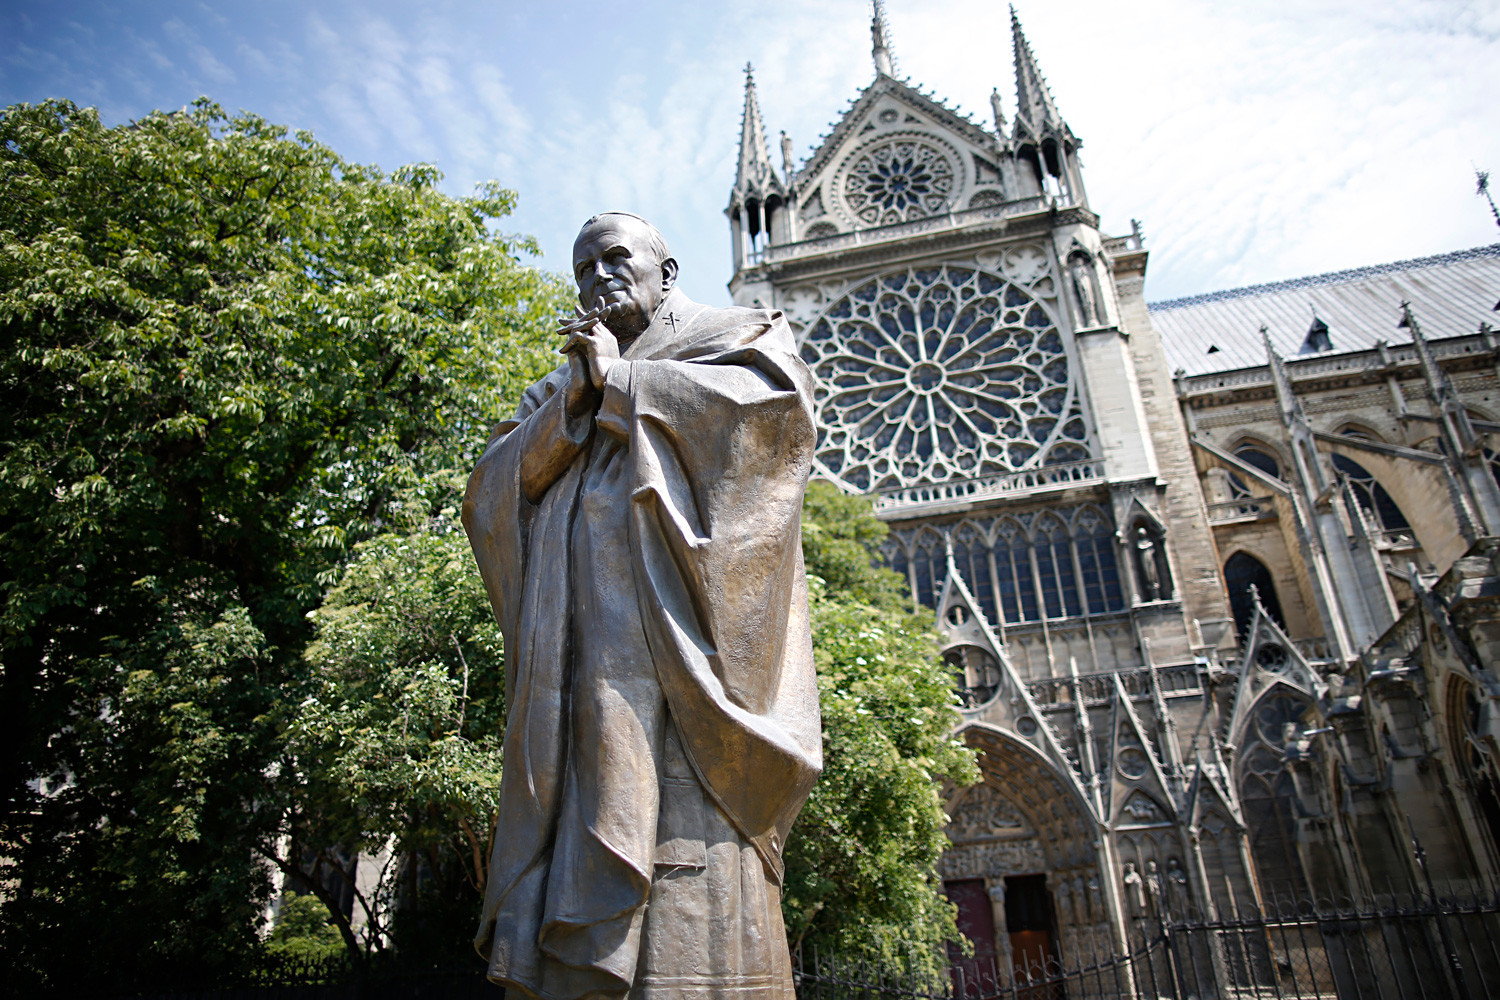 The sculpture of Pope John Paul II near the Notre-Dame Cathedral in Paris